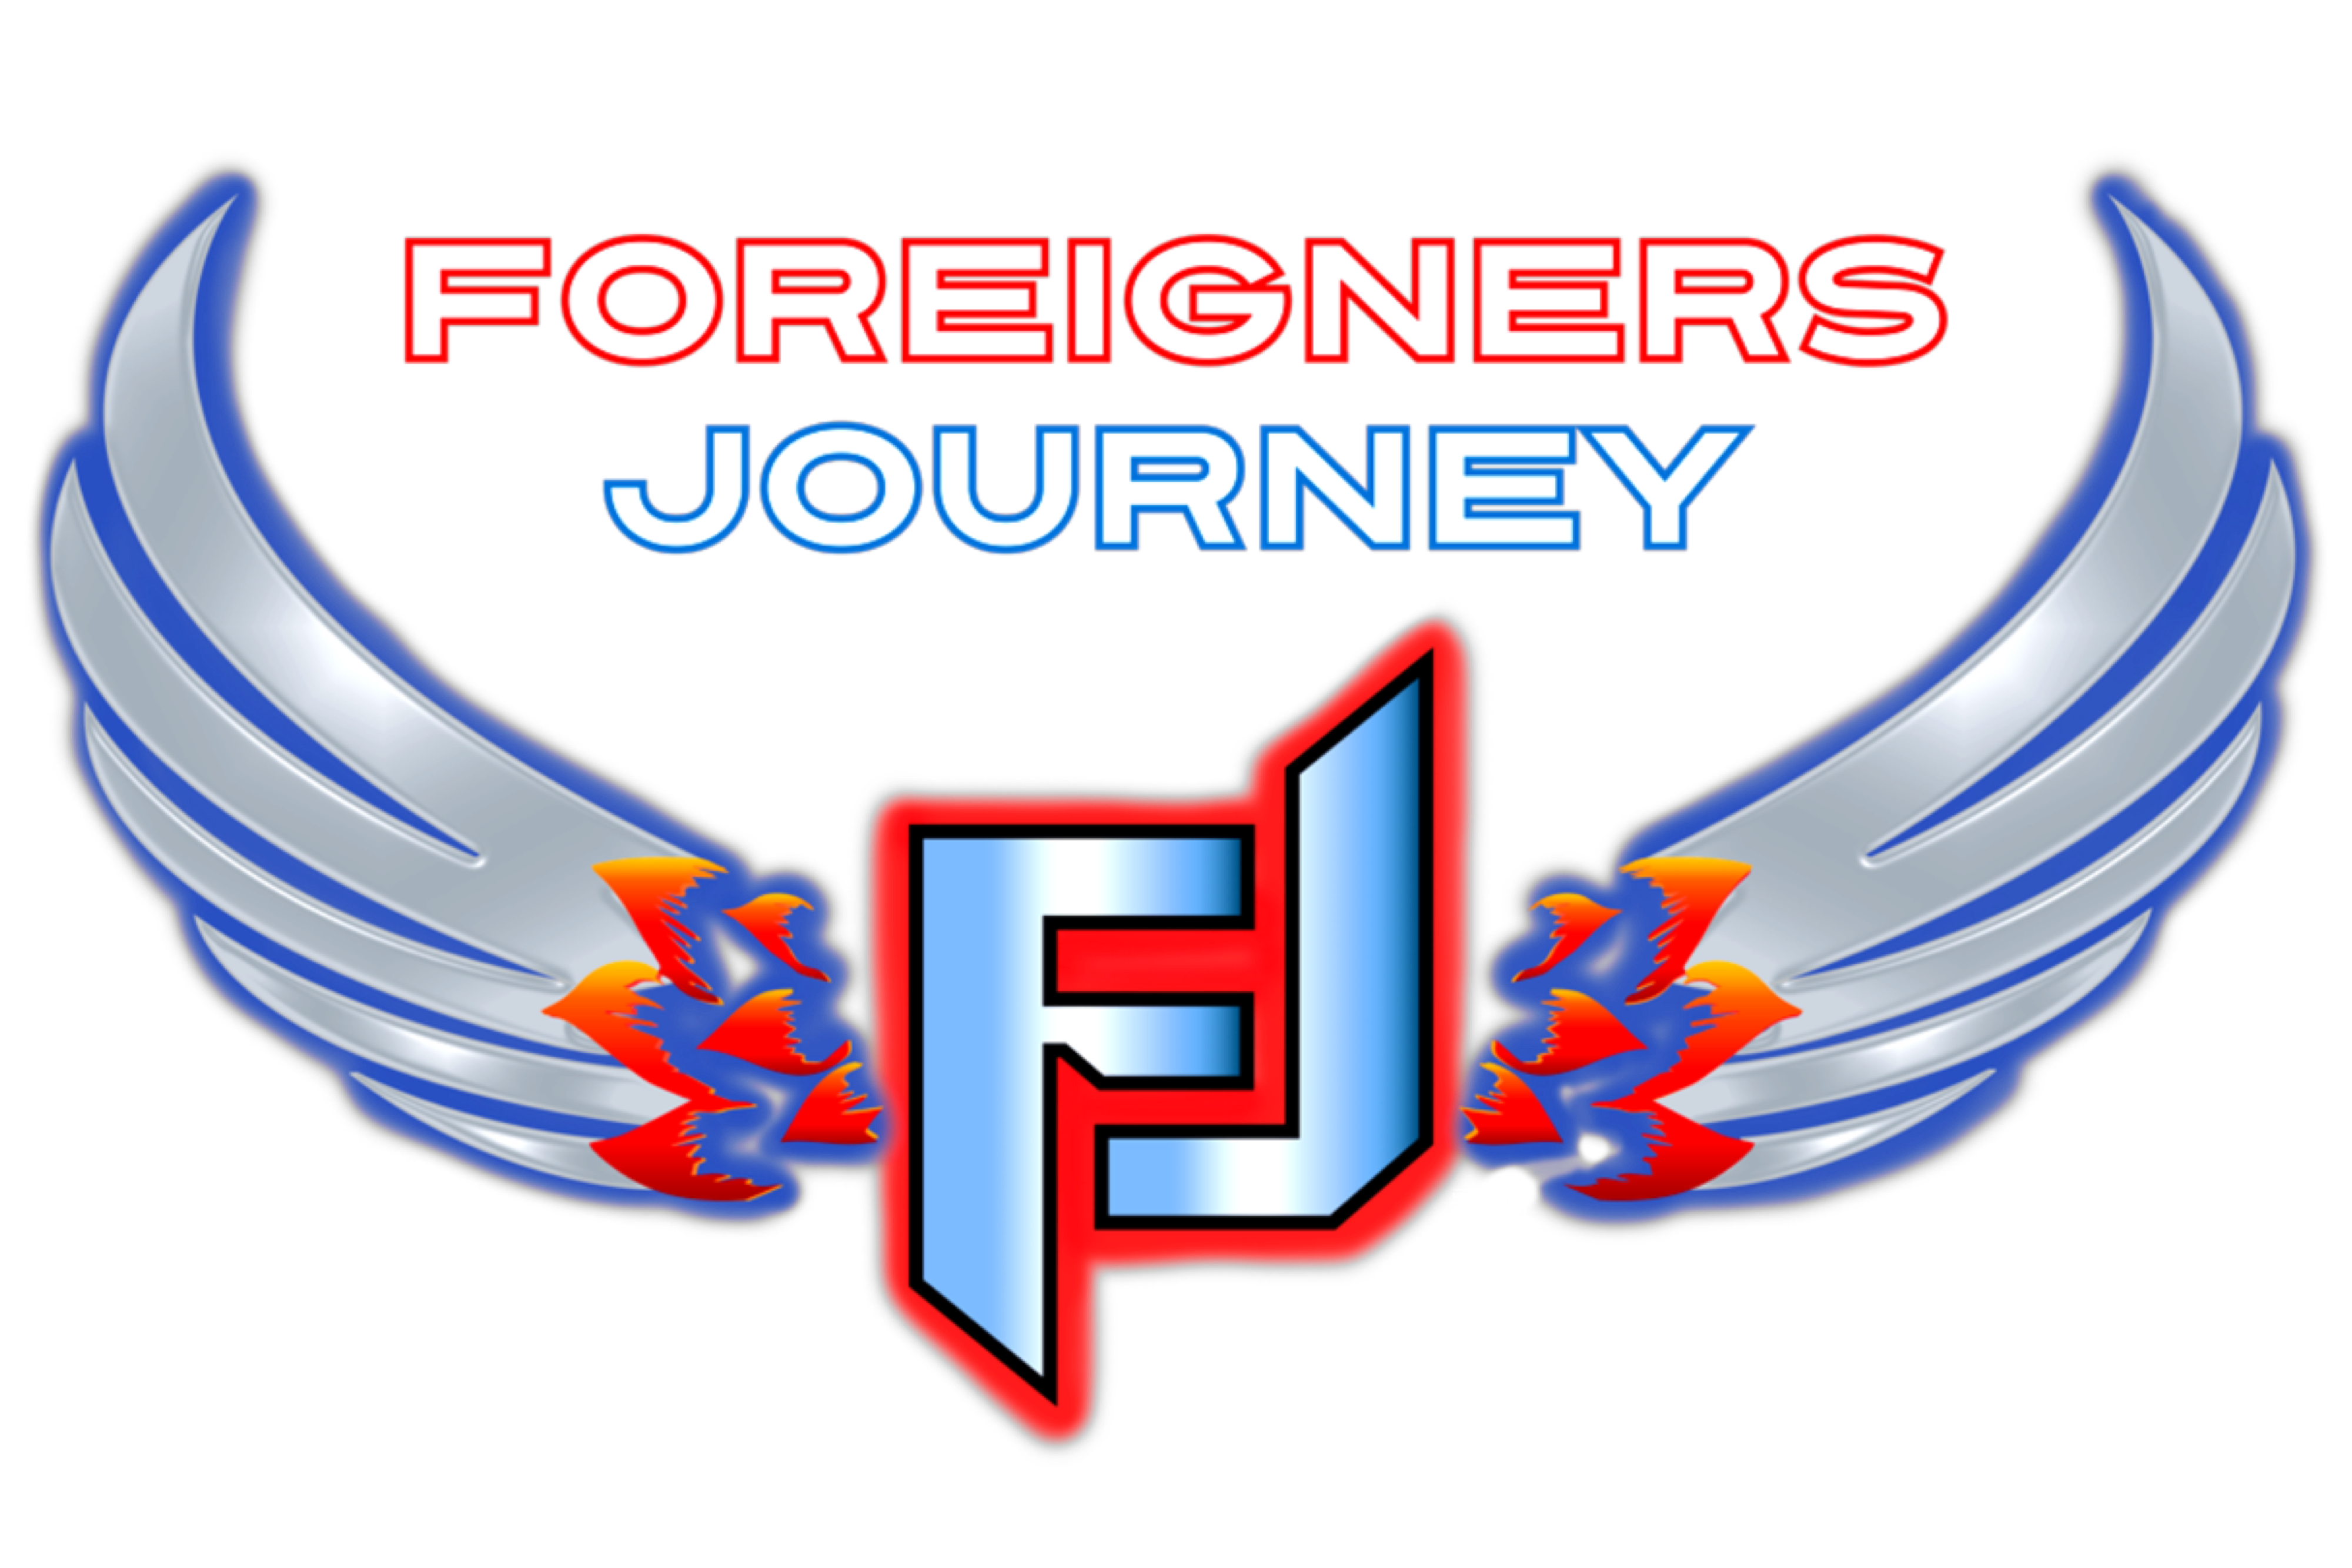 FOREIGNERS JOURNEY